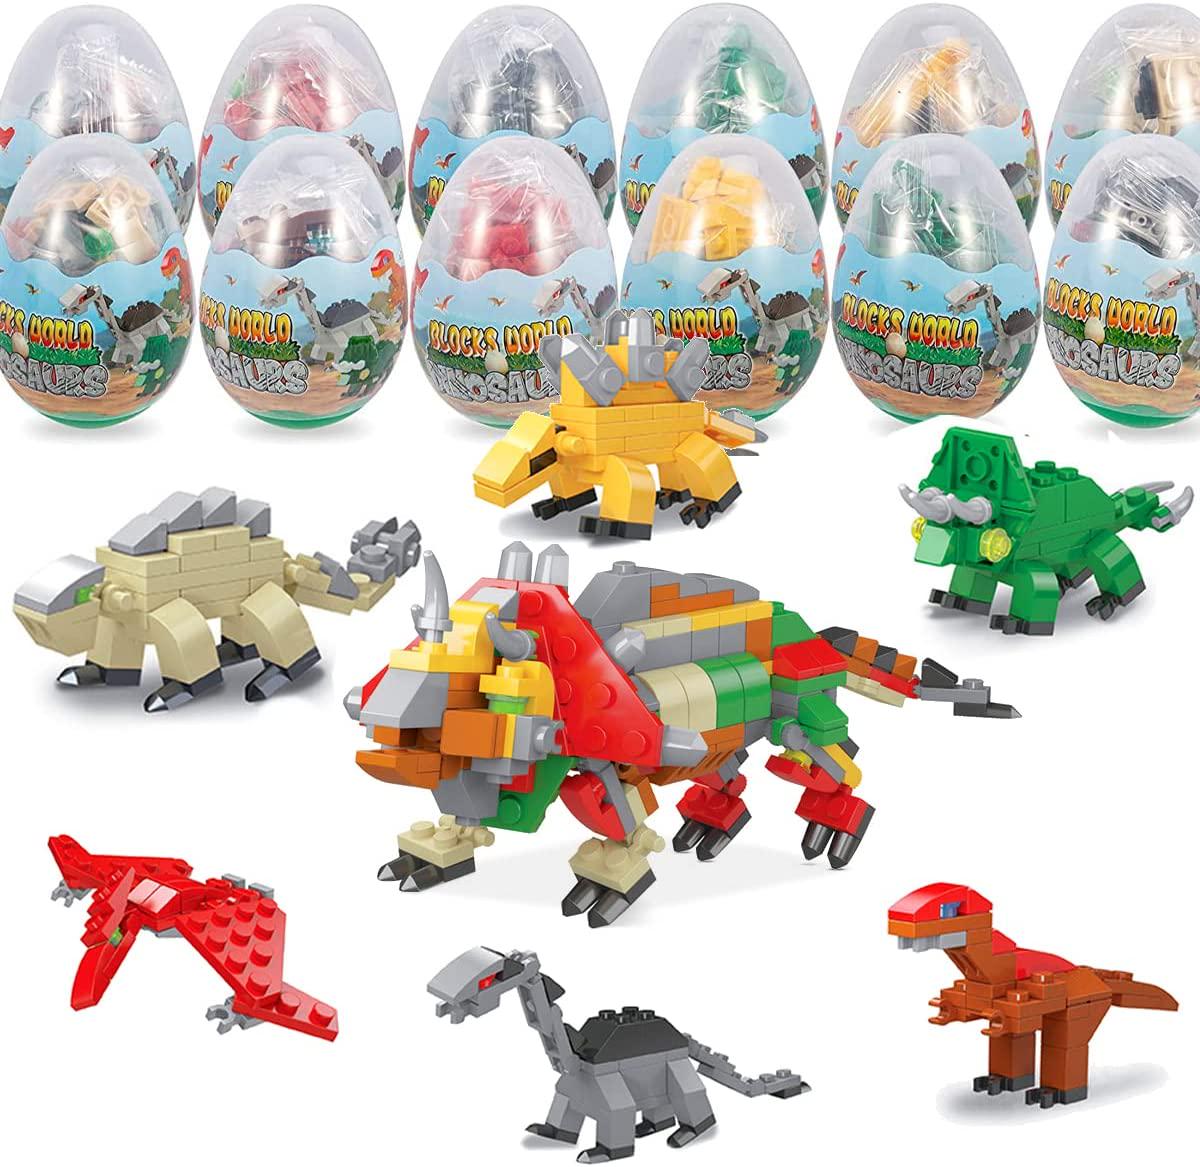 LEBOCADO, LEBOCADO 12PCS Dinosaur Building Blocks, 6 in 1 STEM Toys Building Sets with Gift Box Jurassic Mini Animals Building Blocks Sets, Party Favors for Kids Goodie Bags/Cake Topper/Birthday Gifts